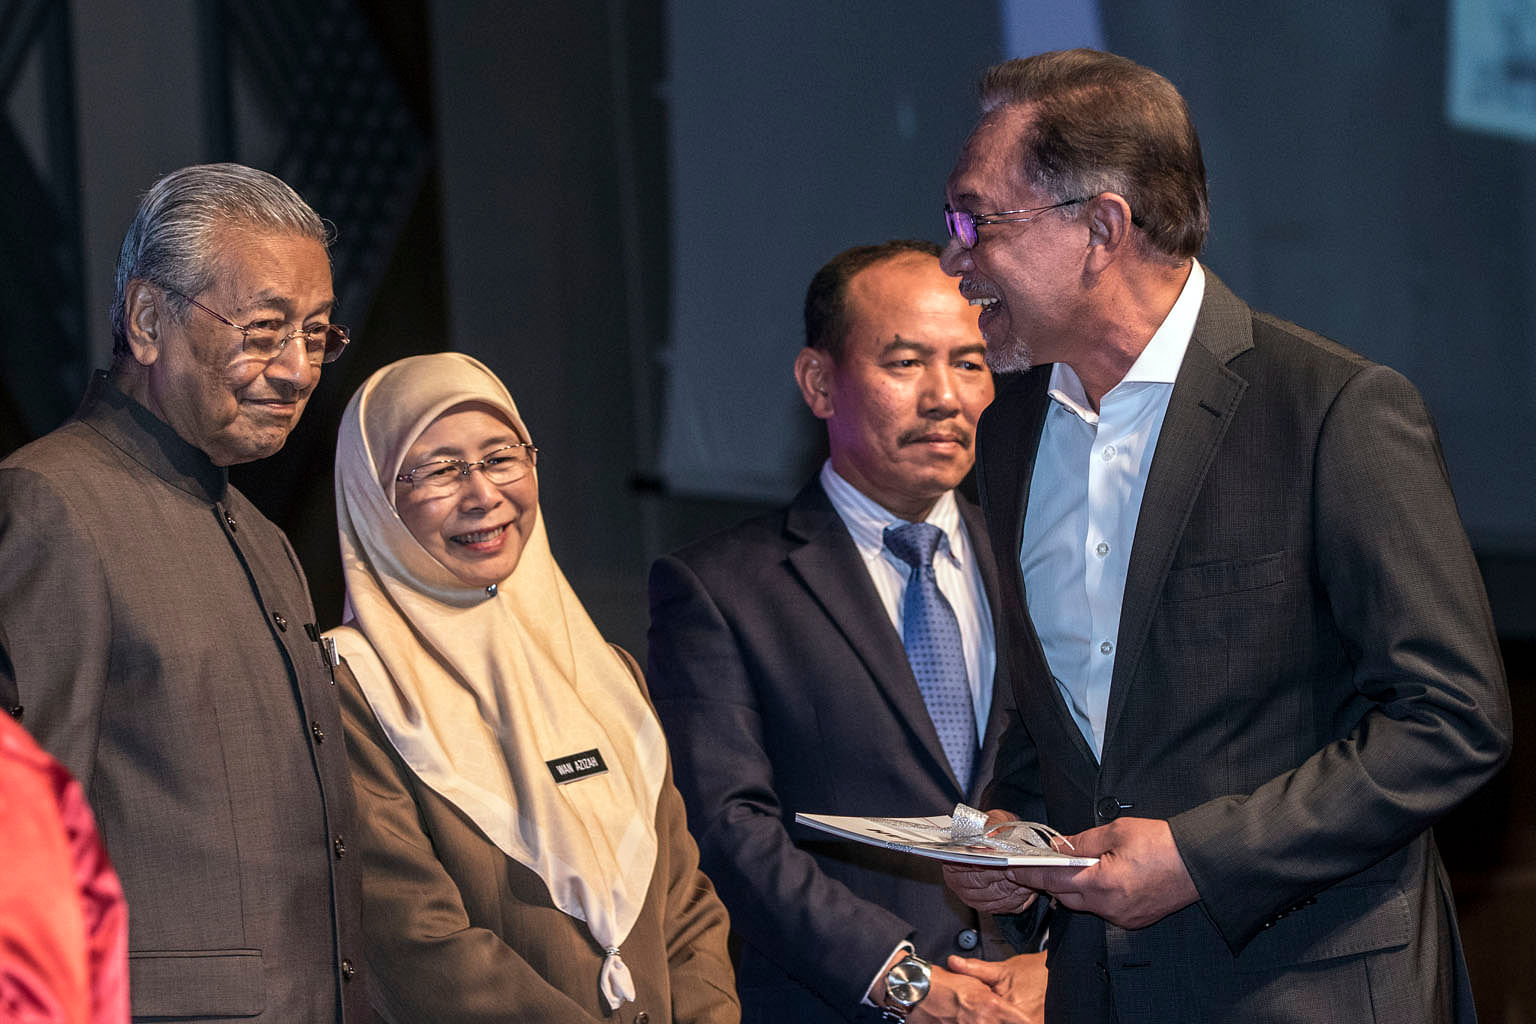 (From left) Malaysian Prime Minister Mahathir Mohamad, Deputy Prime Minister Wan Azizah Wan Ismail, Chief Secretary Ismail Bakar and prime minister-in-waiting Anwar Ibrahim at the launch of the National Anti-Corruption Plan in Putrajaya on Jan 29.